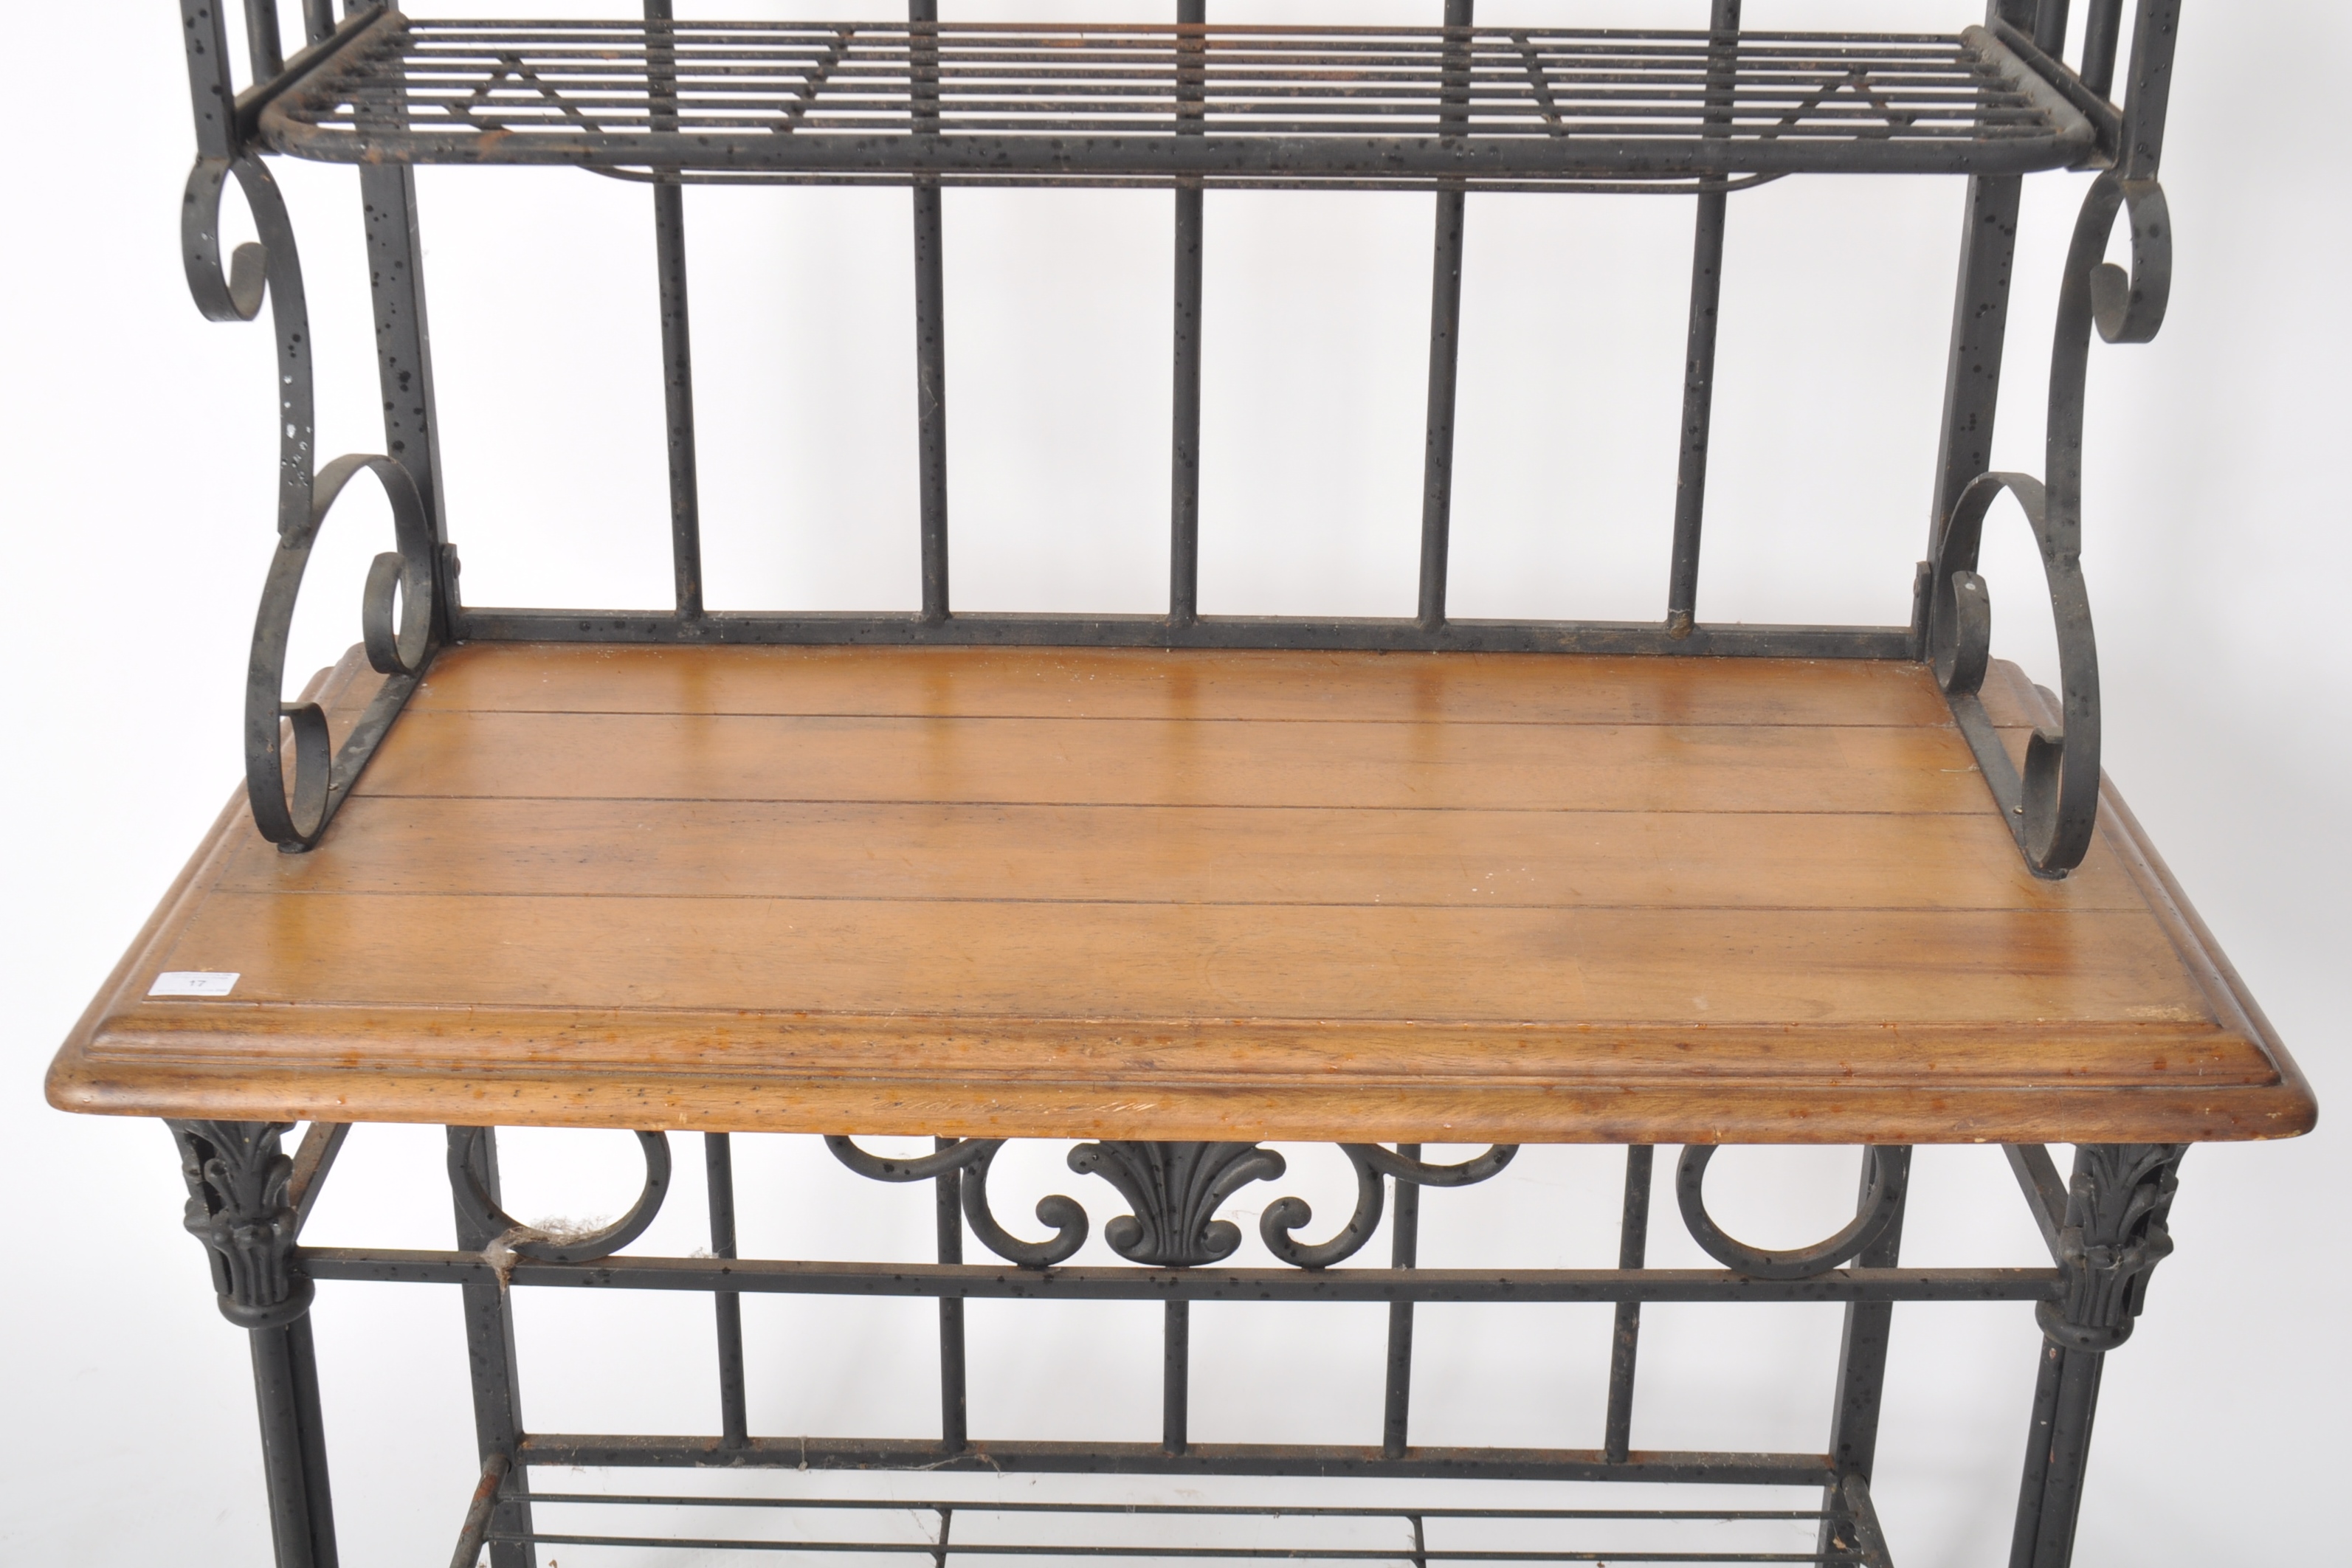 CONTEMPORARY FRENCH STYLE WROUGHT IRON BAKERS RACK - Image 3 of 6